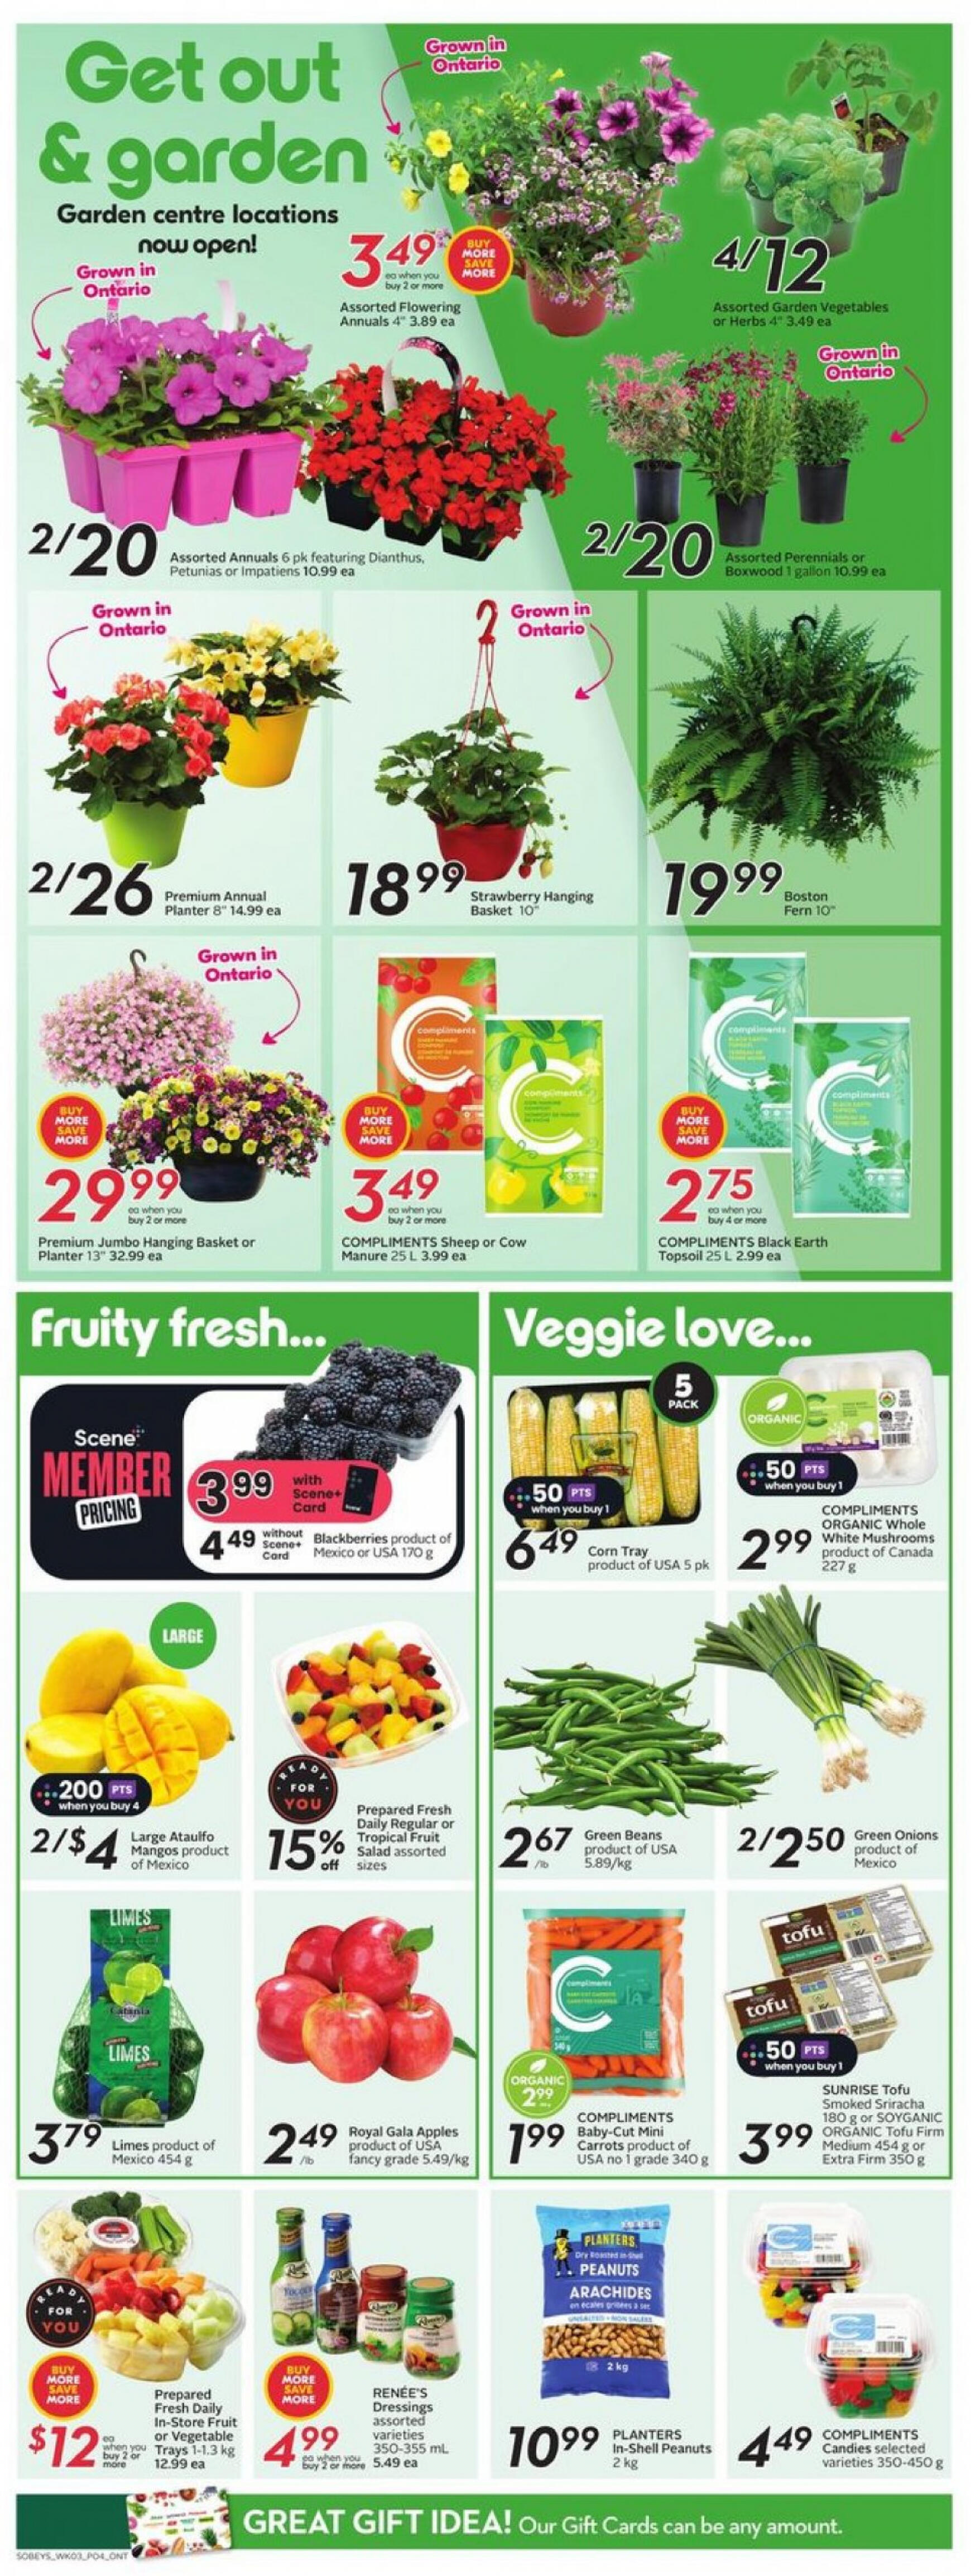 sobeys - Sobeys - Weekly Flyer - Ontario flyer current 16.05. - 22.05. - page: 9